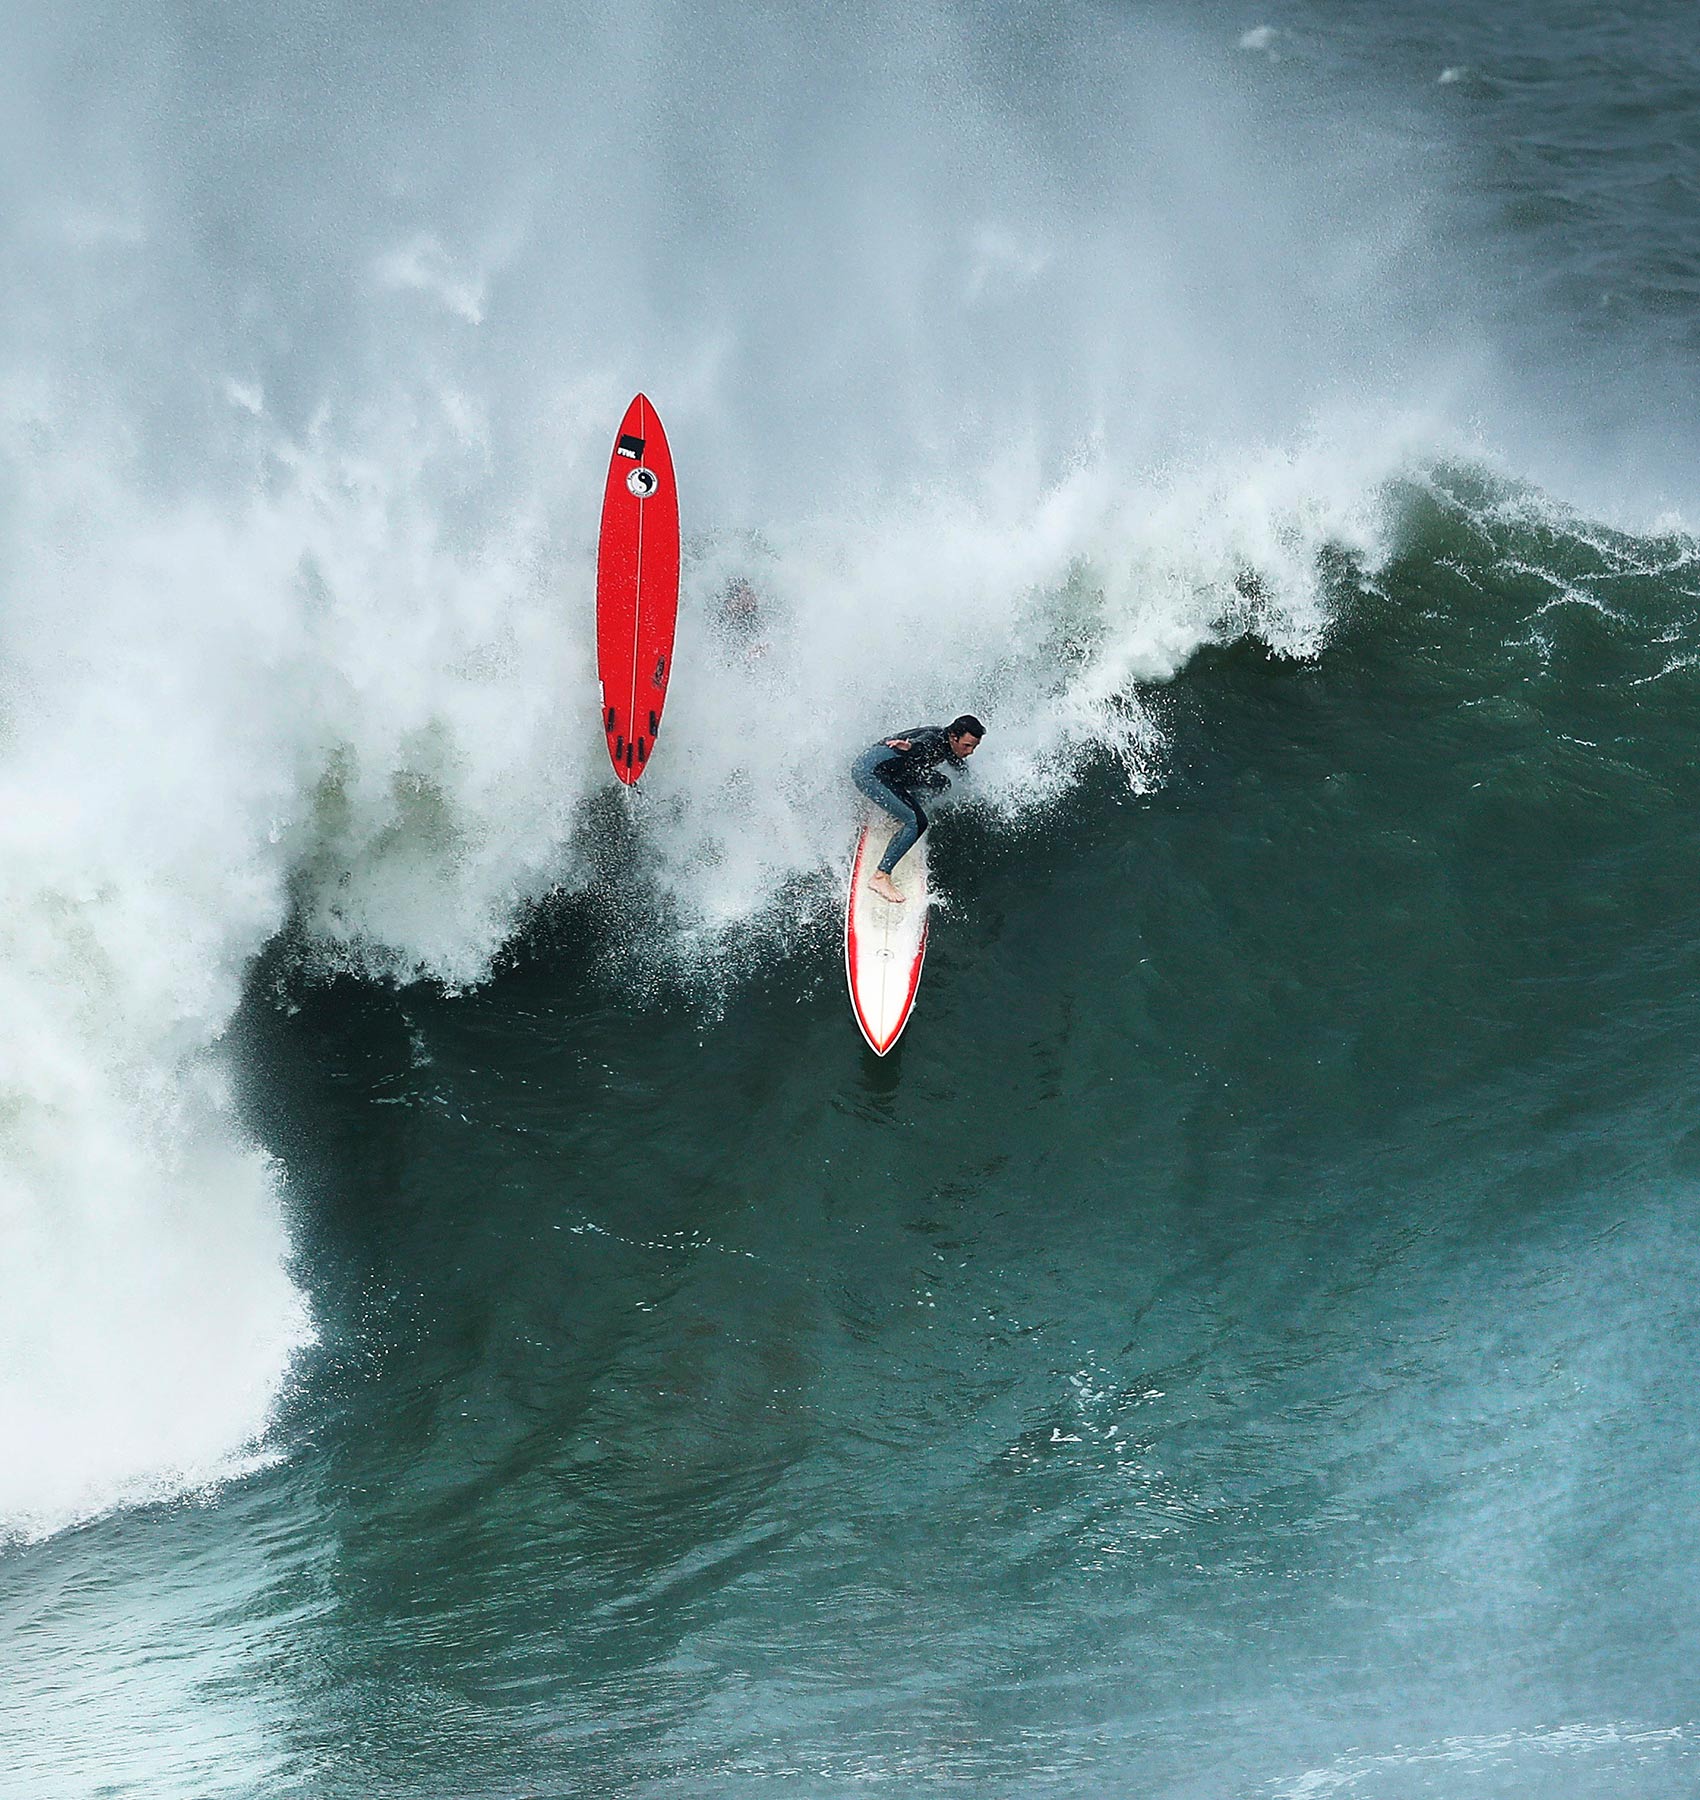 Surfers-take-to-huge-swell-off-Gordons-Bay-during-wild-Sydney-weather-Hillyard-Web